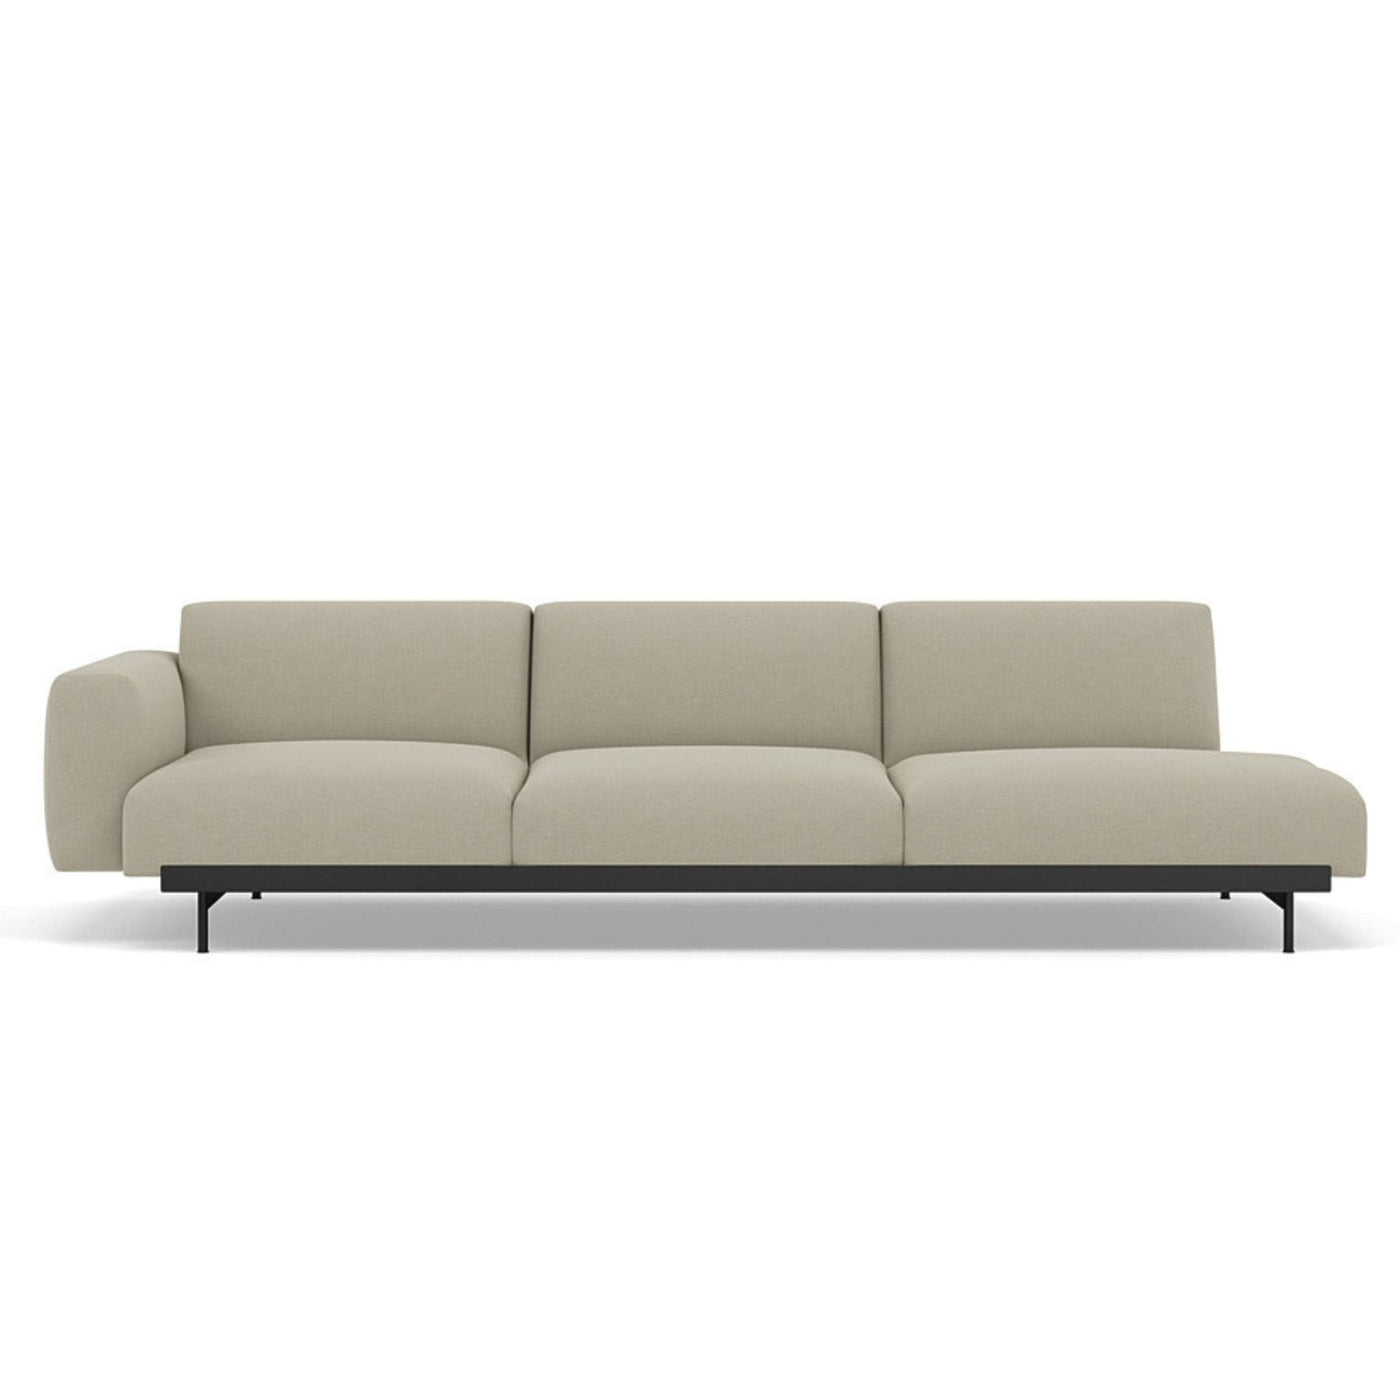 Muuto In Situ Modular 3 Seater Sofa, configuration 3. Made to order from someday designs. #colour_fiord-322